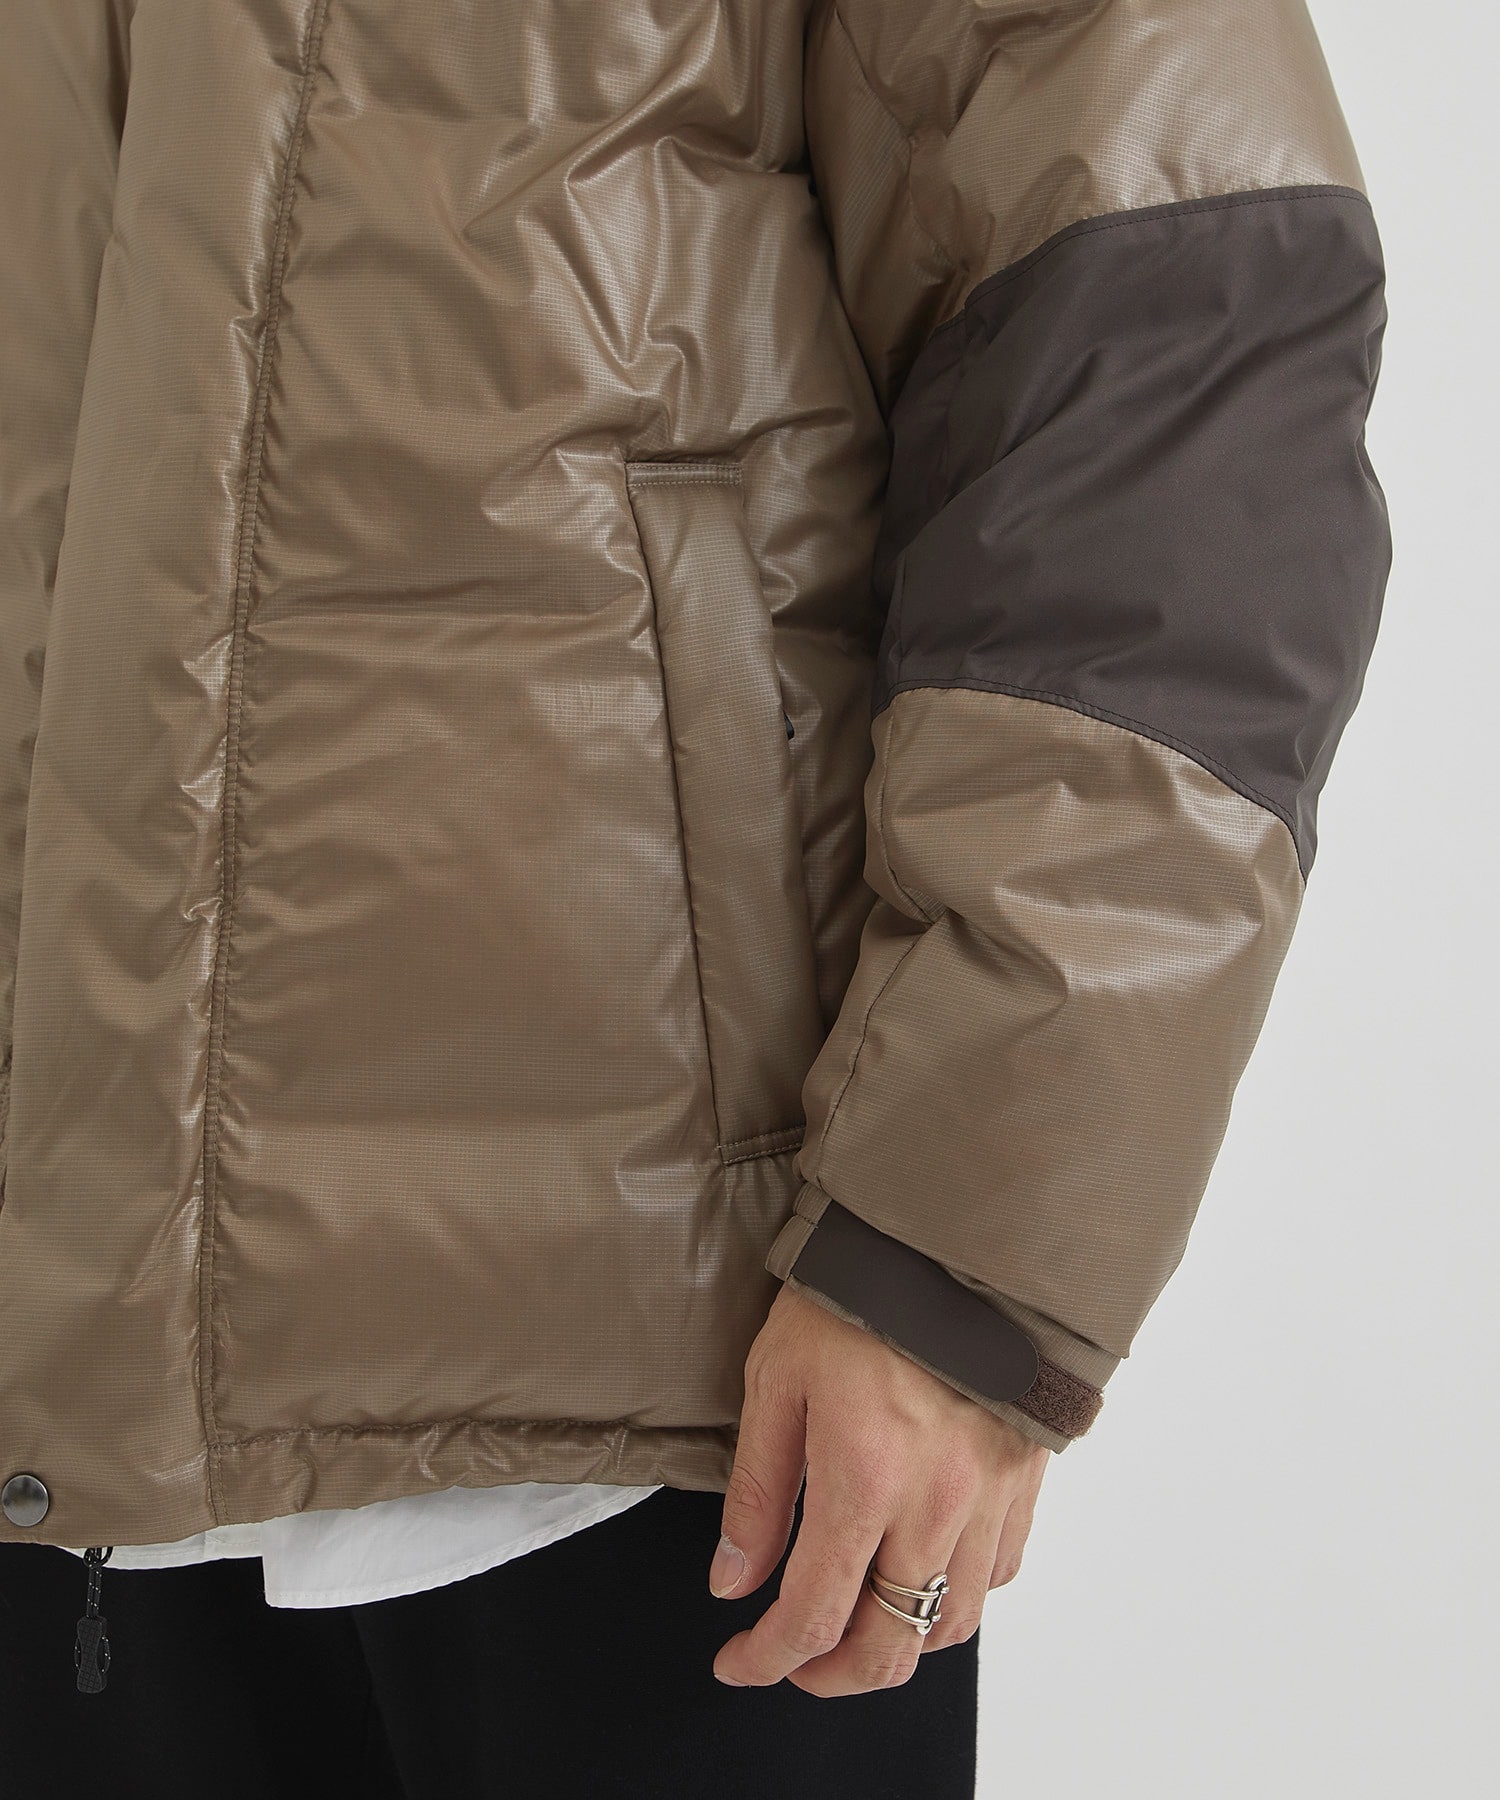 Down Mountain Stand Jacket THE PERMANENT EYE